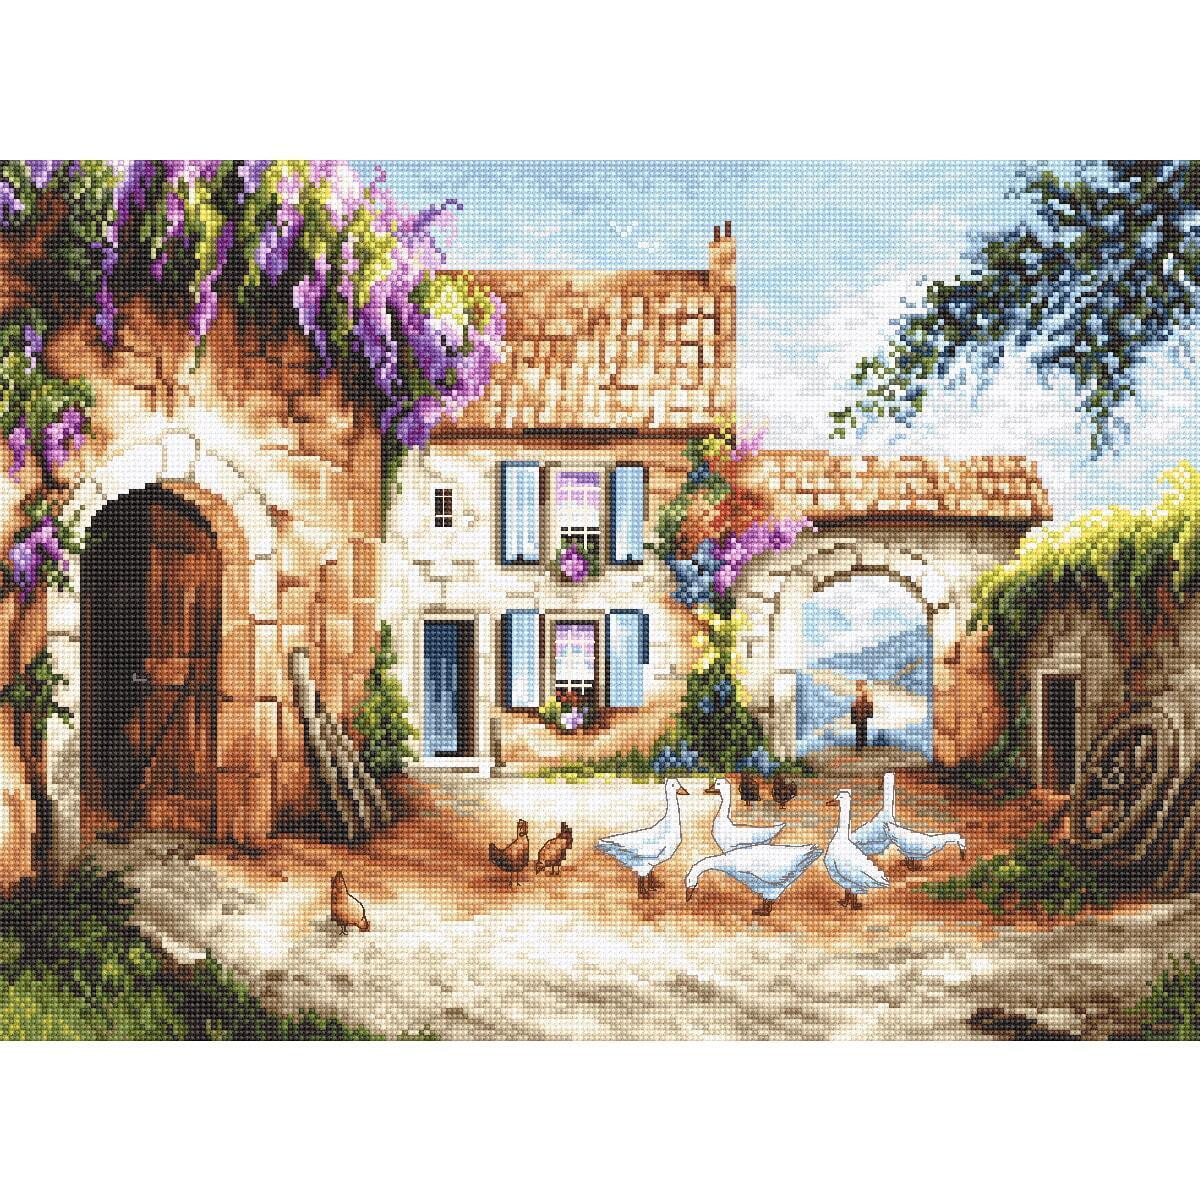 A colorful, idyllic scene shows a rustic stone house with...